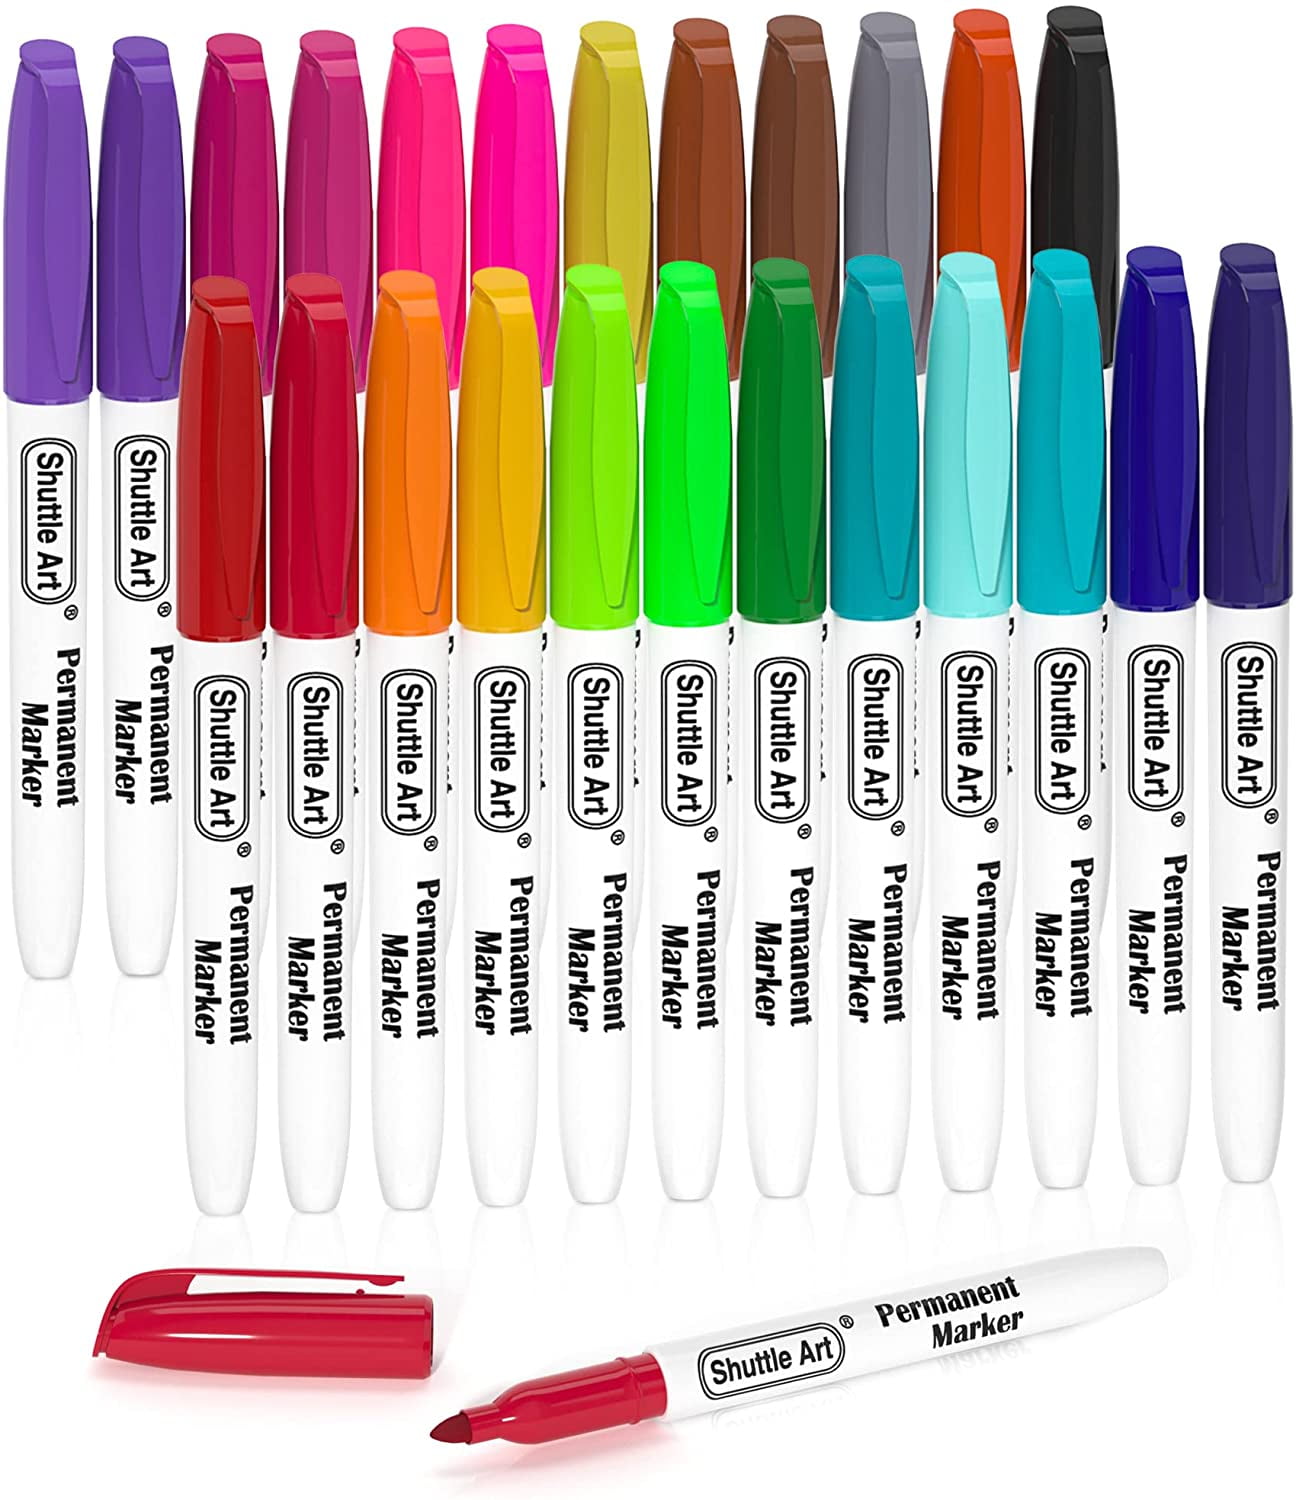 Permanent Markers,Shuttle Art 100 Pack Black Permanent Marker set,Fine Point Marking Works on Plastic,Wood,Stone,Metal and Glass for Doodling 